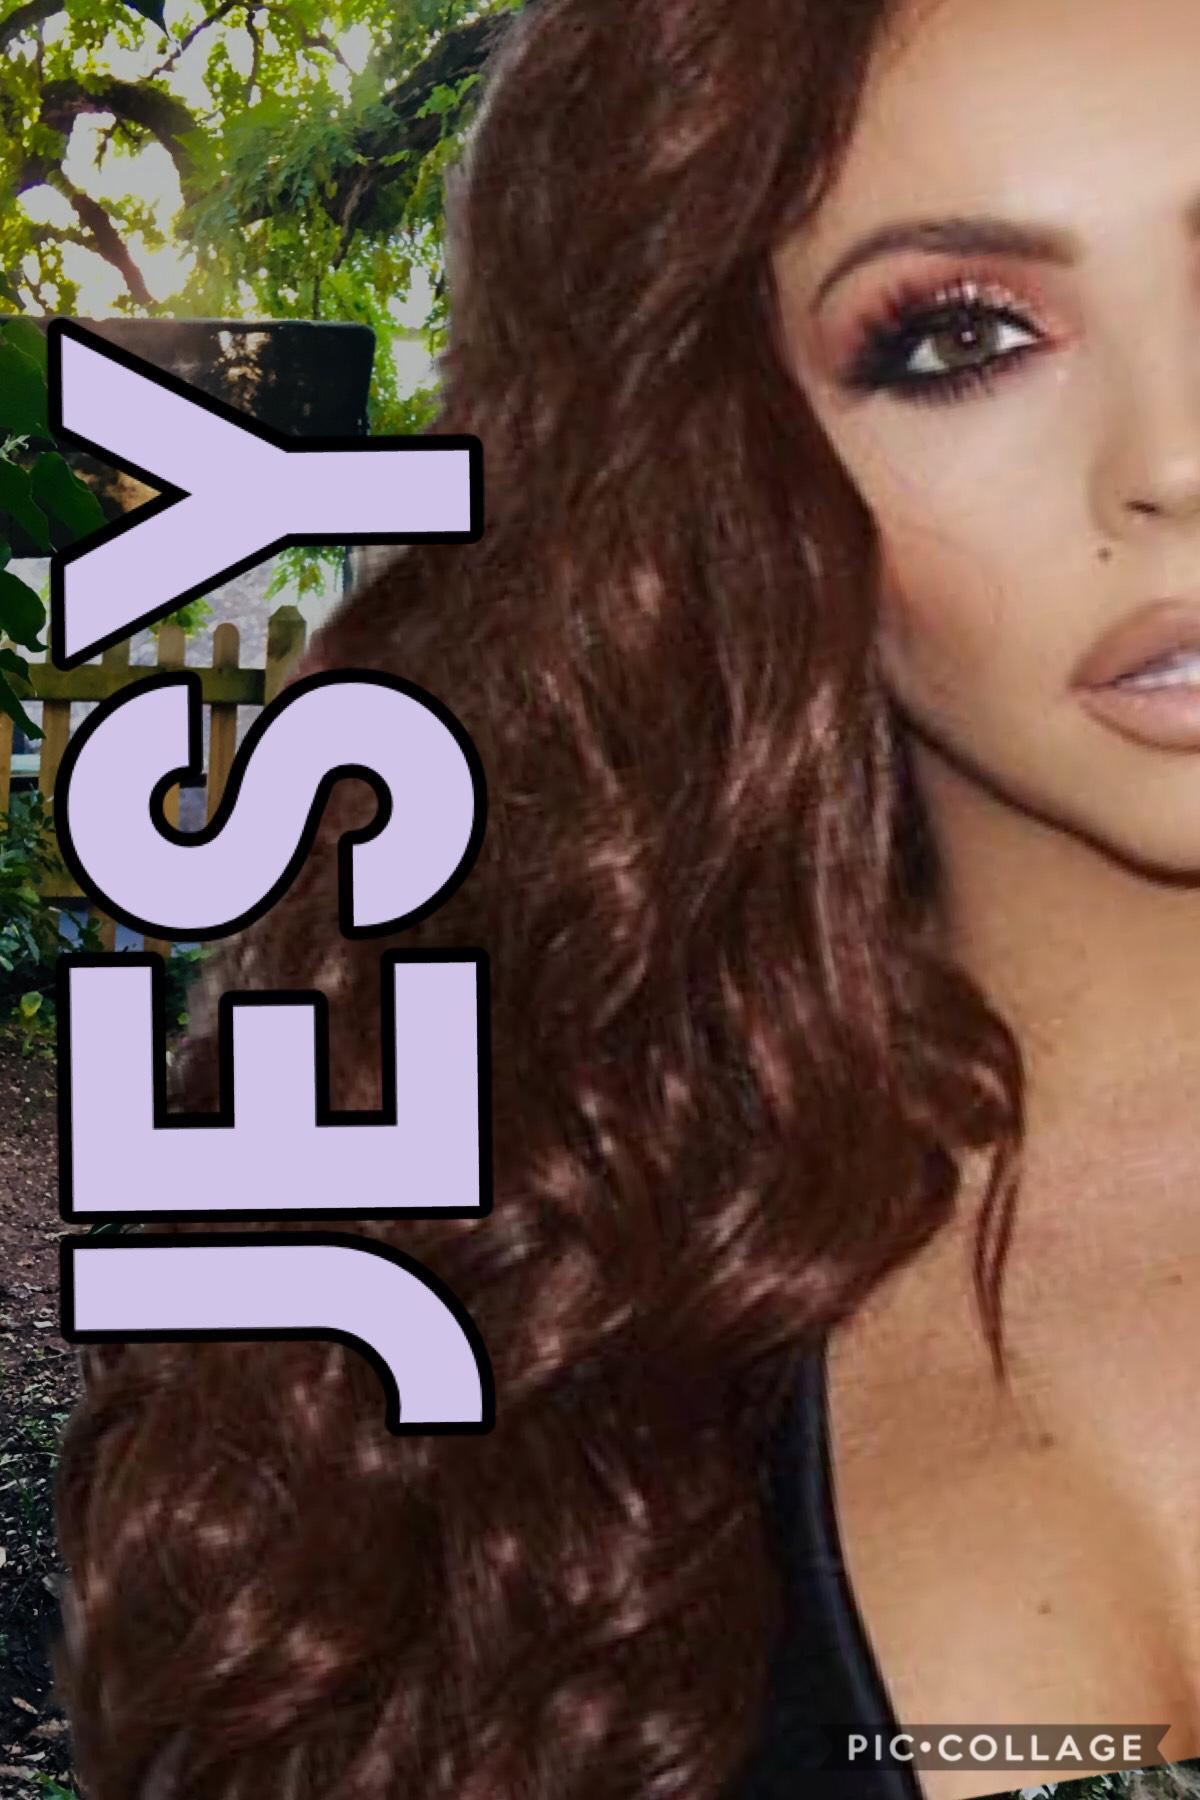 Jesy! If you are going to use this picture please give me credit!